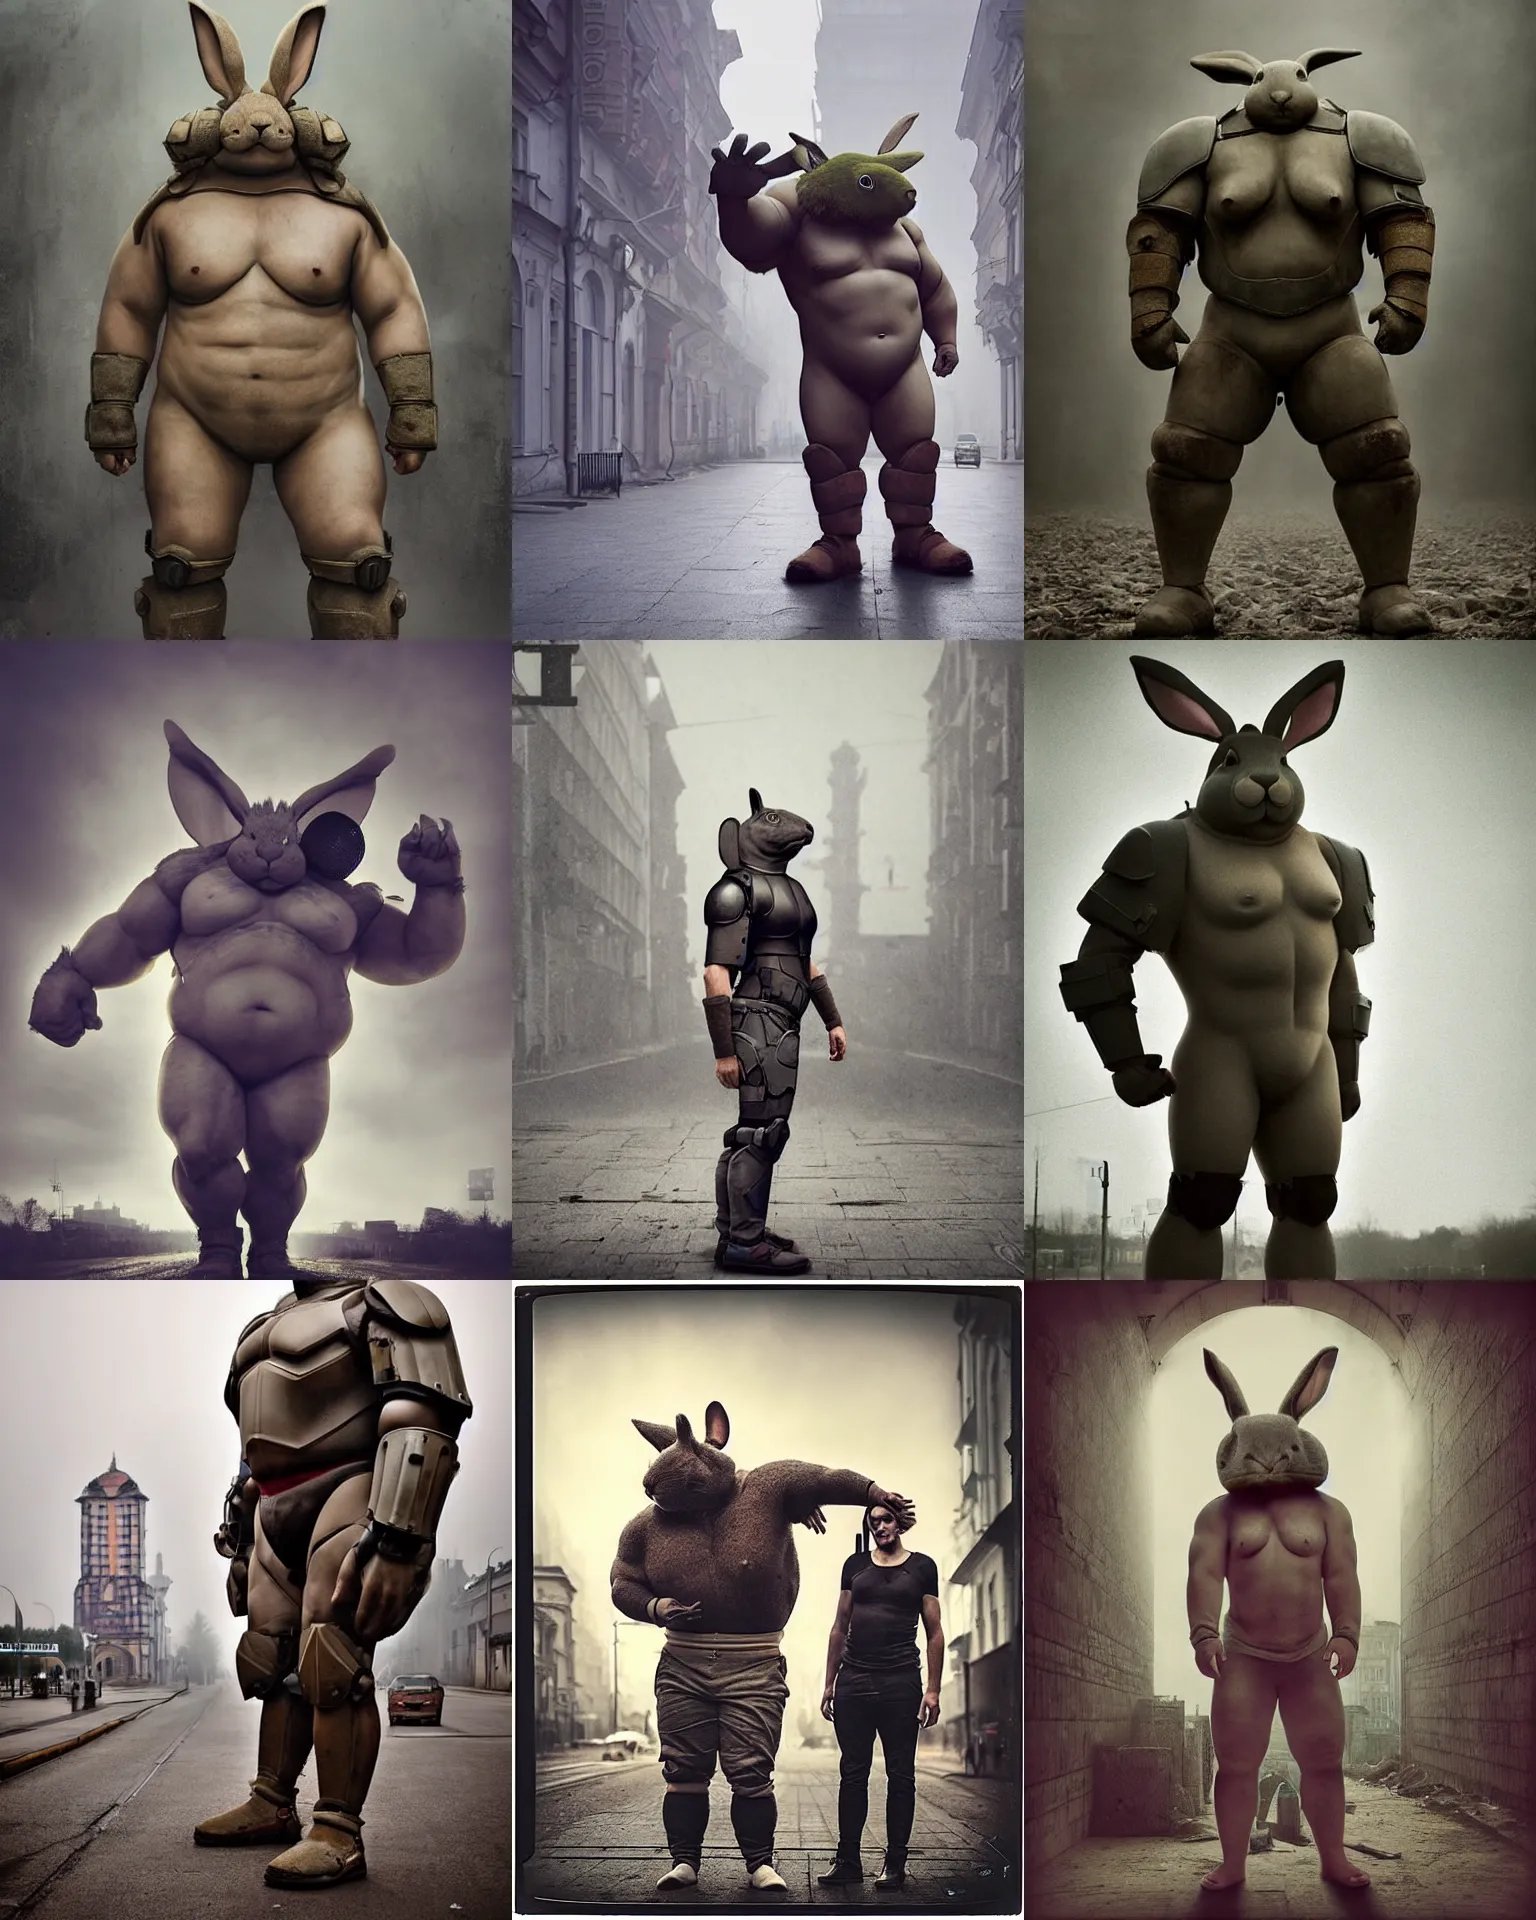 Prompt: epic pose!!! giant oversized bulky chubby battle sci - fi chest armor anthropomorphic rabbit rugged hulked, in legnica, full body, cinematic focus, polaroid photo, vintage, neutral dull colors, soft lights, foggy mist, by oleg oprisco, by thomas peschak, by discovery channel, by victor enrich, by gregory crewdson